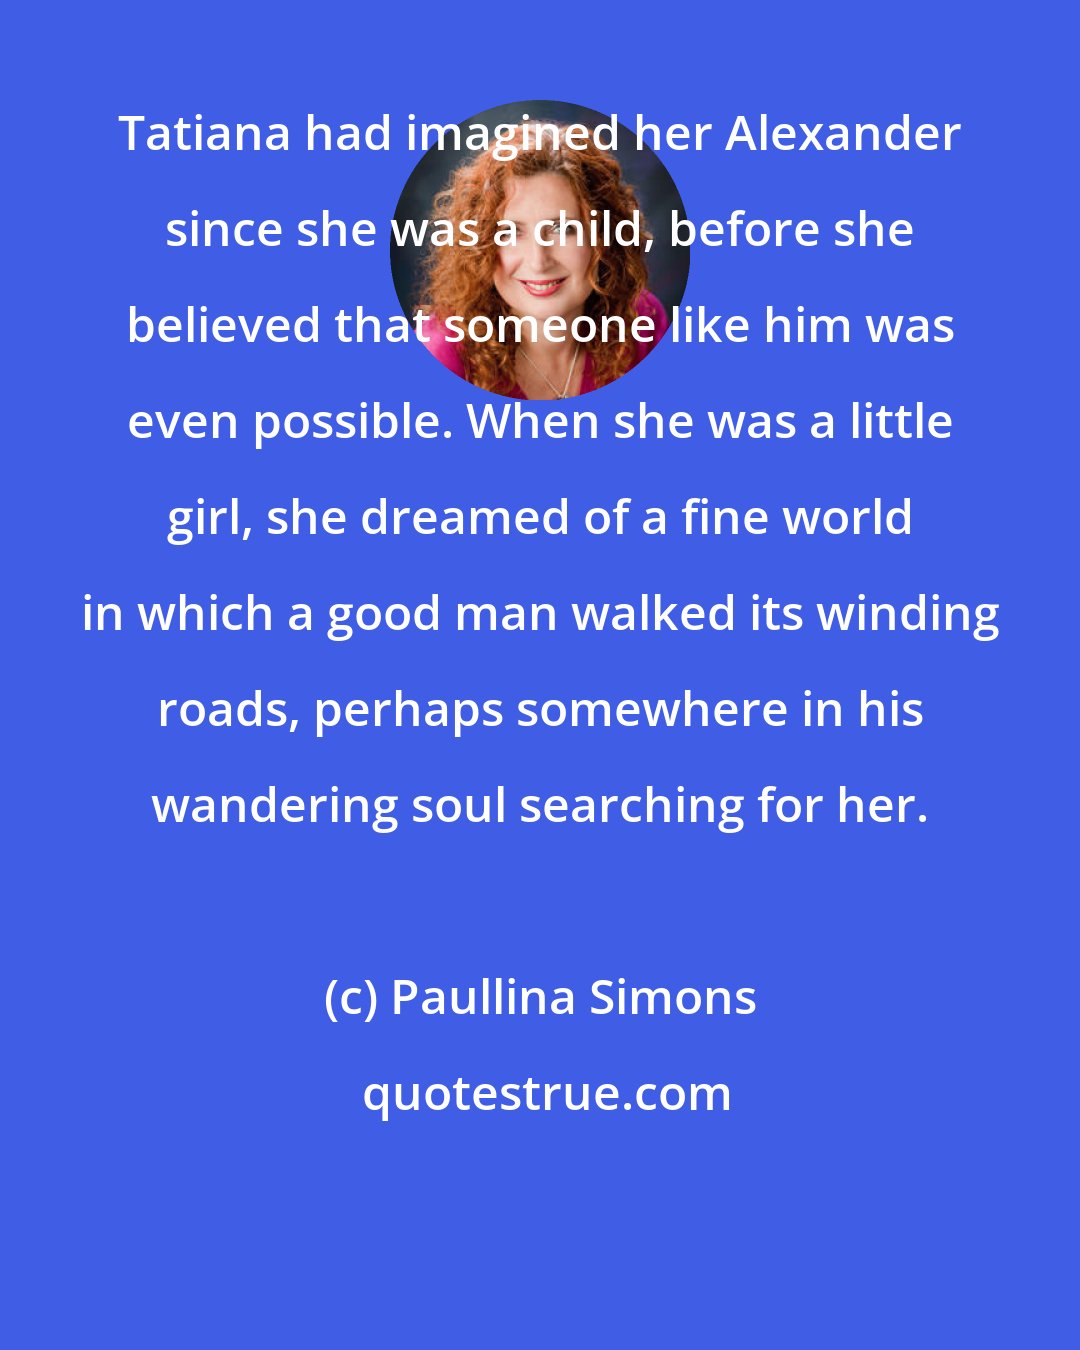 Paullina Simons: Tatiana had imagined her Alexander since she was a child, before she believed that someone like him was even possible. When she was a little girl, she dreamed of a fine world in which a good man walked its winding roads, perhaps somewhere in his wandering soul searching for her.